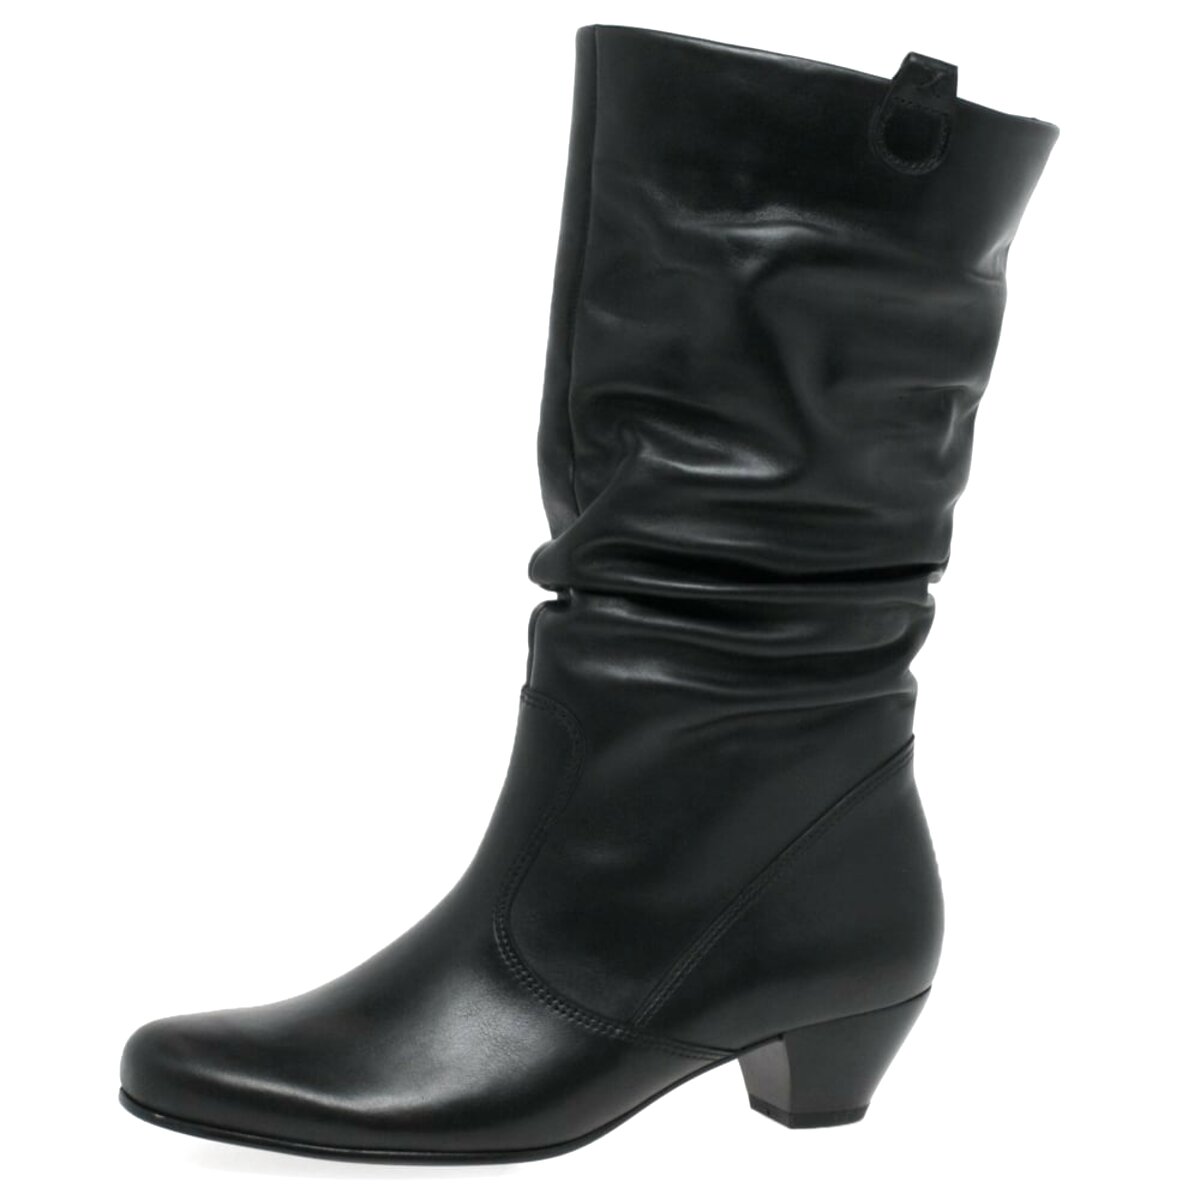 Gabor Wide Calf Boots for sale in UK 